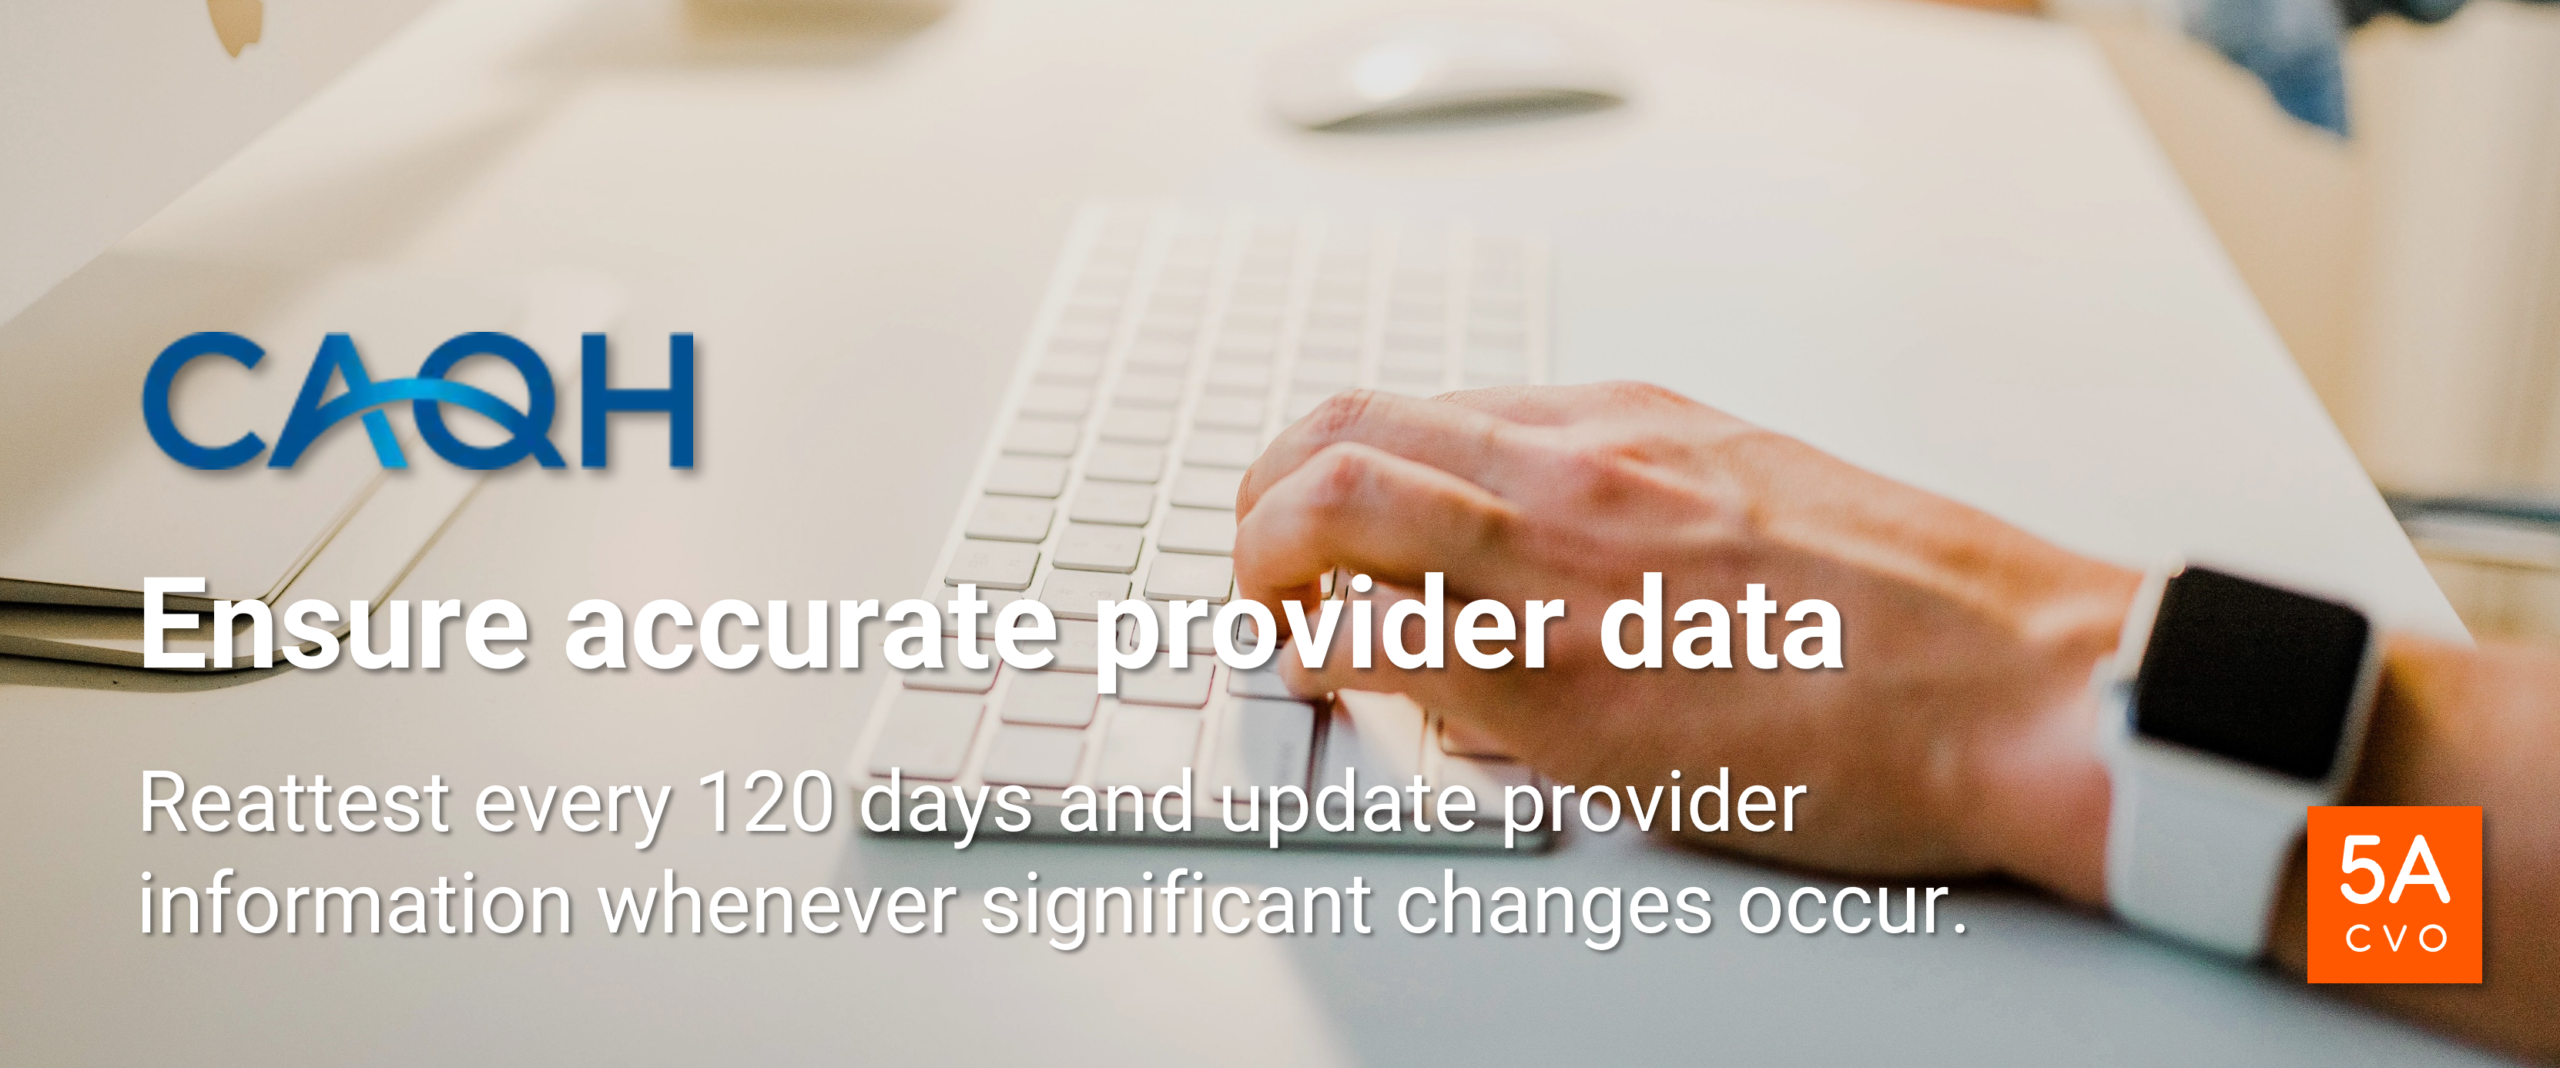 CAQH Challenge 1 Ensuring Accurate Provider Data